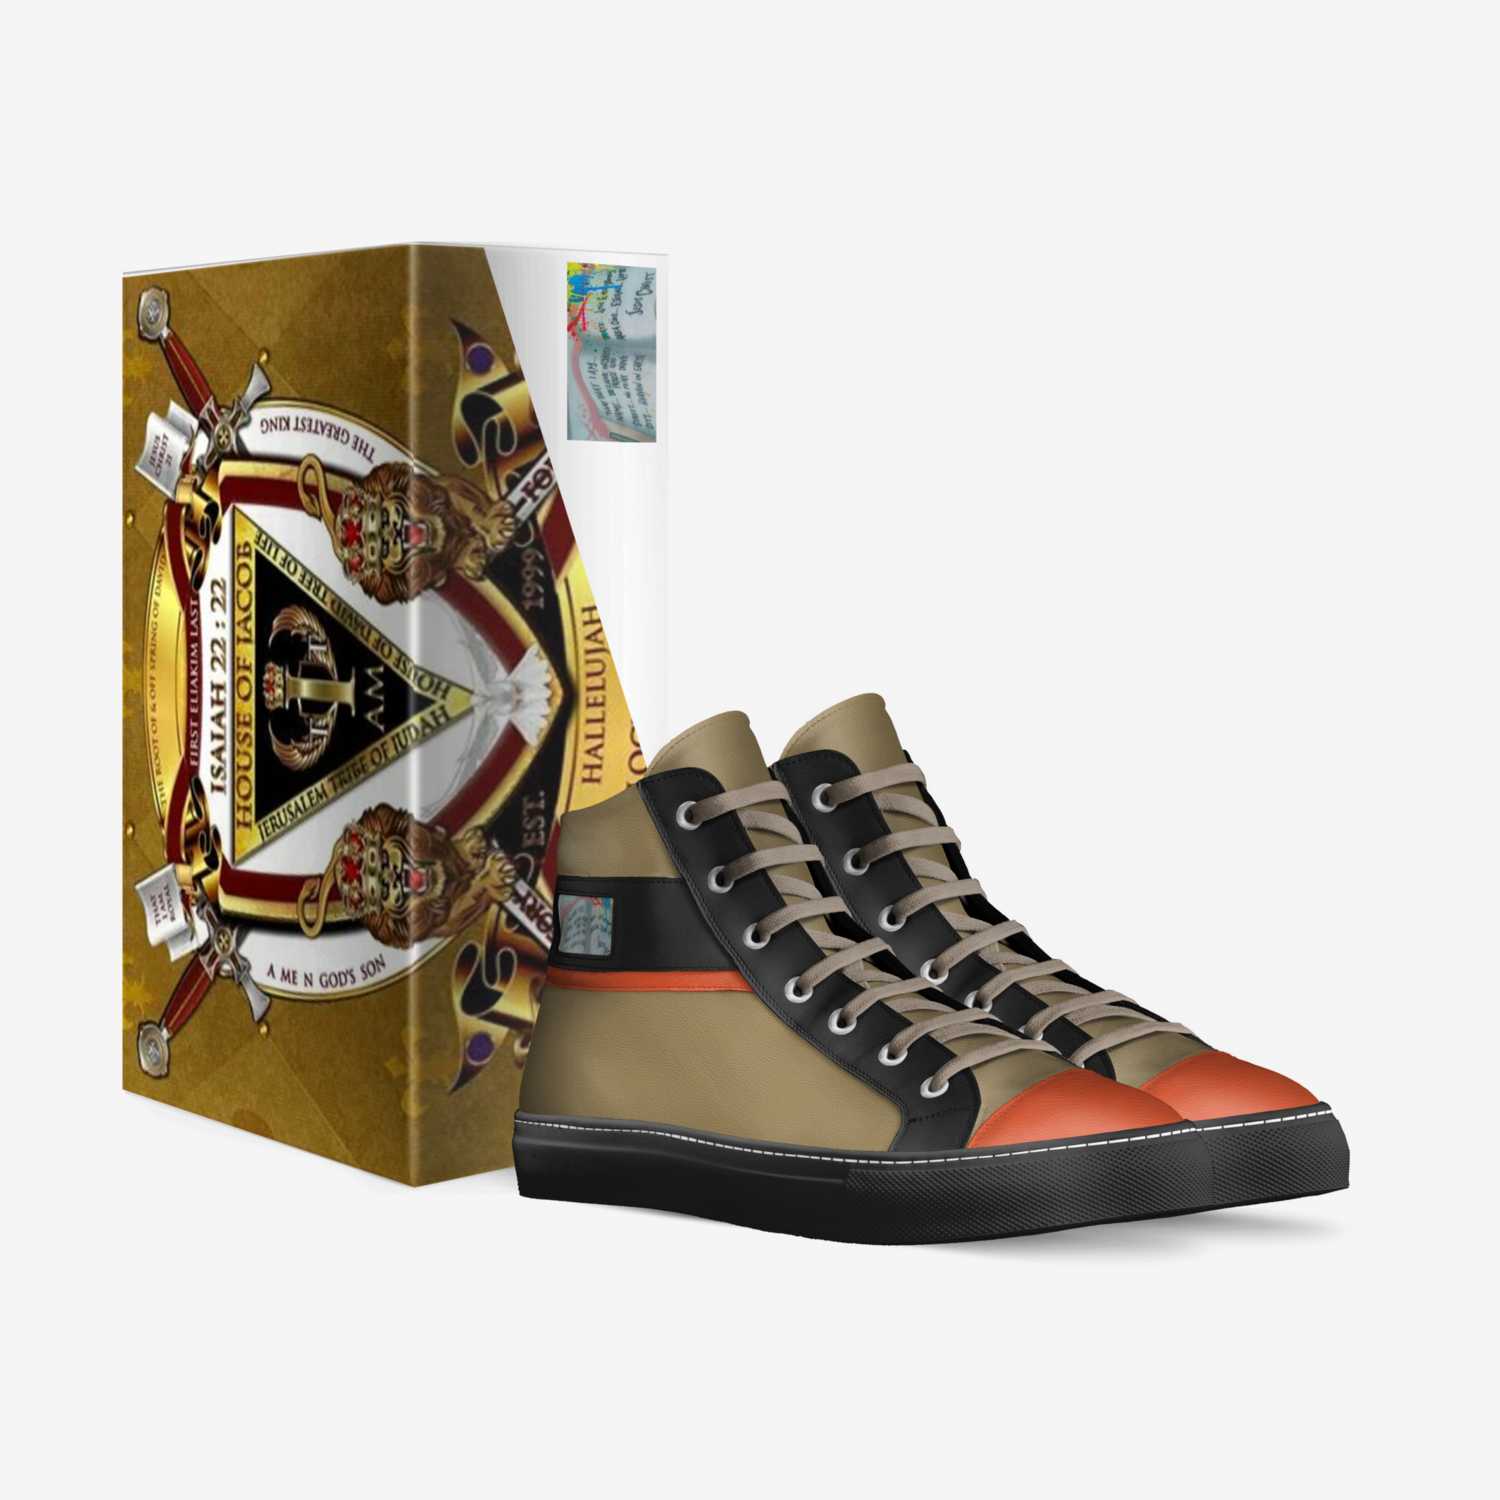 LAMB OF GOD custom made in Italy shoes by Bruce Alston | Box view